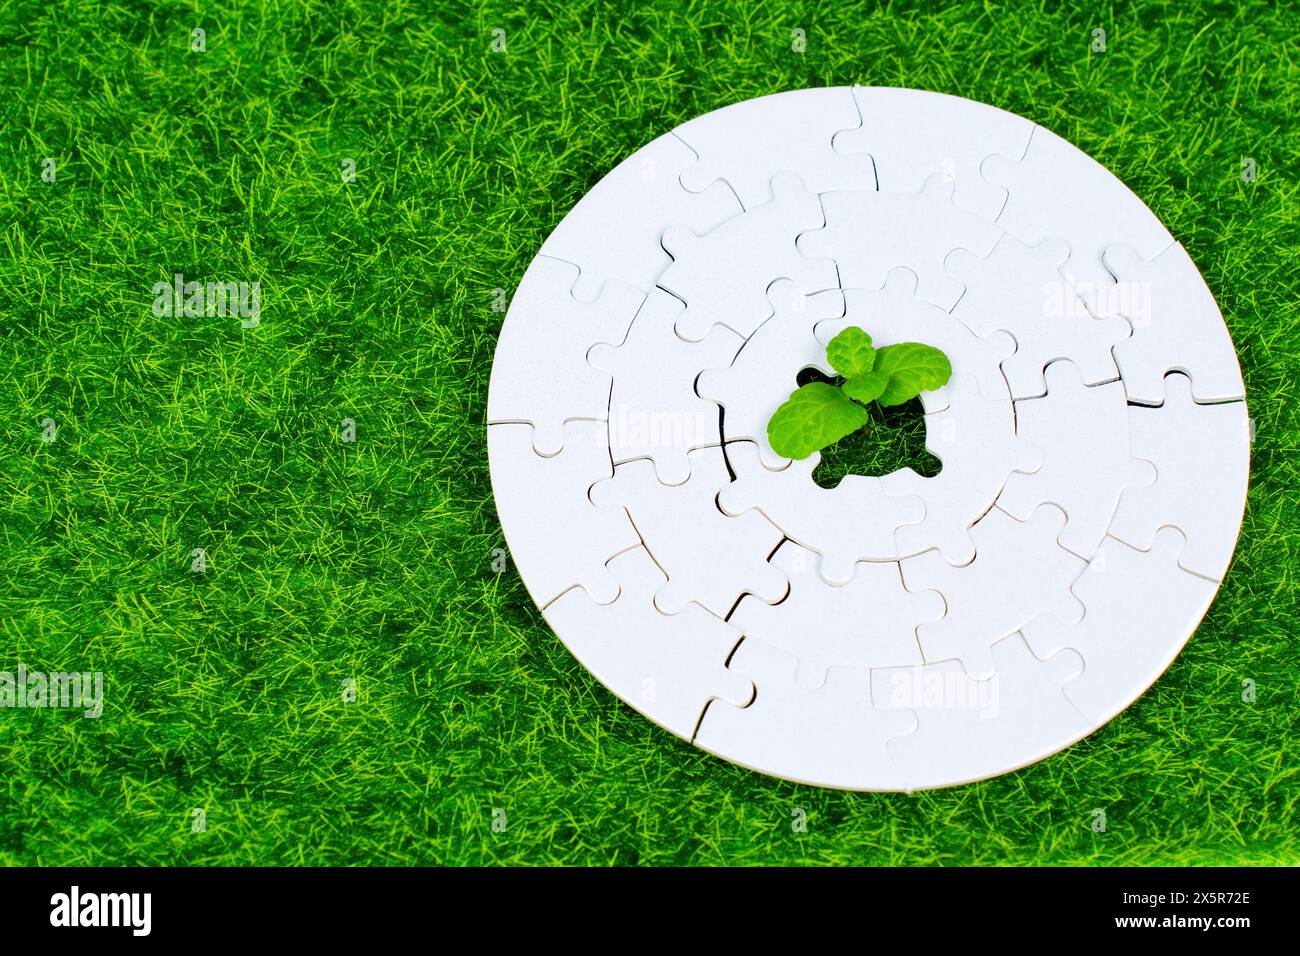 Fresh sprout breaks through a hole in the center of a blank jigsaw puzzle, placed on green lawn. Growth and development related concept. Stock Photo